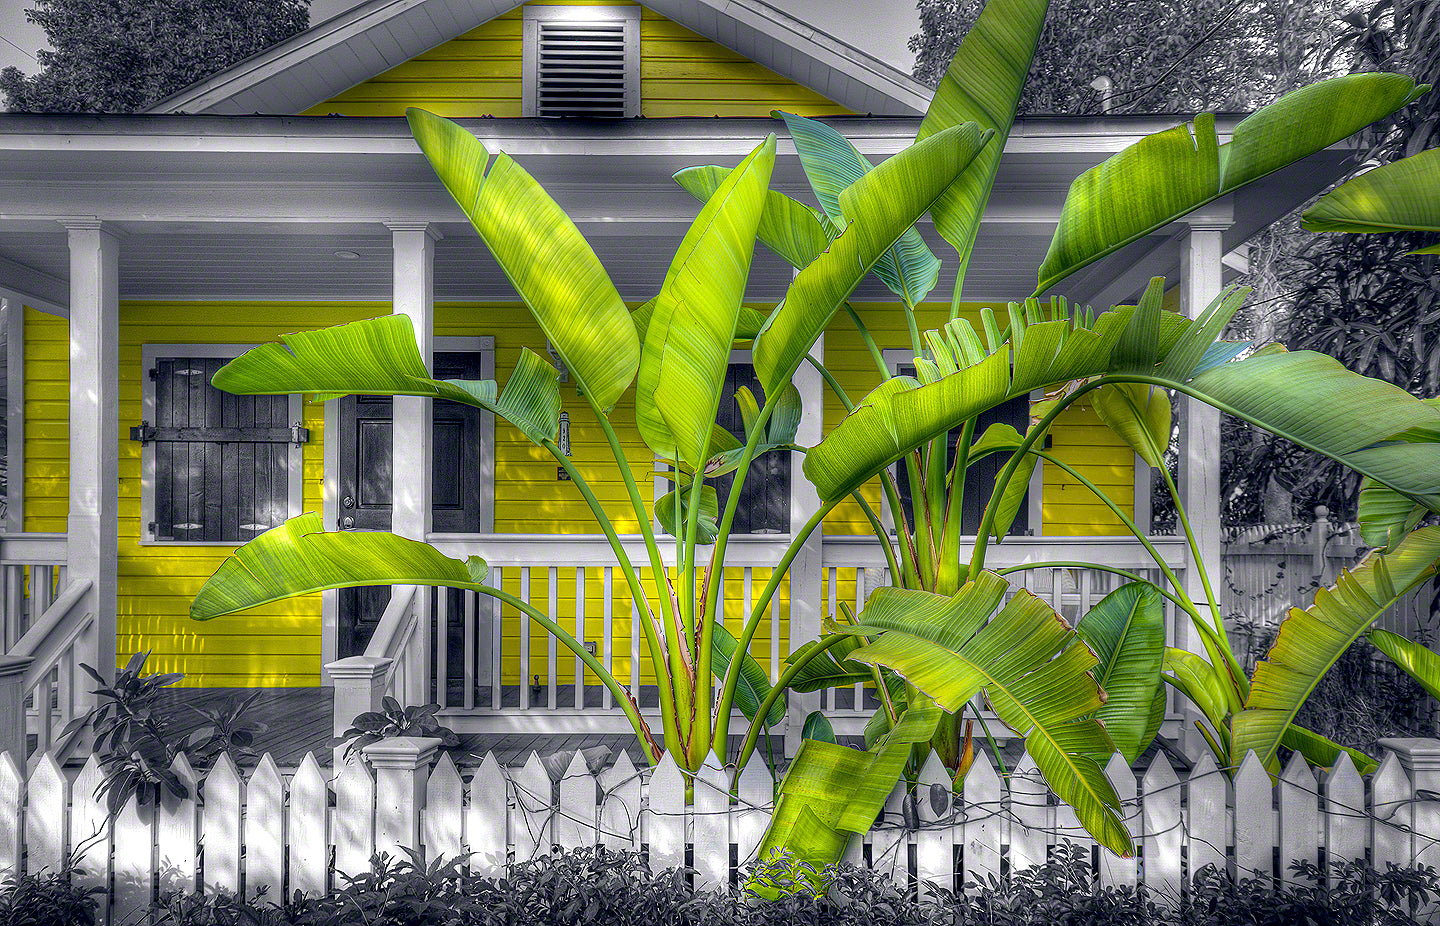 A photo of a tropical yellow house with a beautiful bird of paradise plant in front